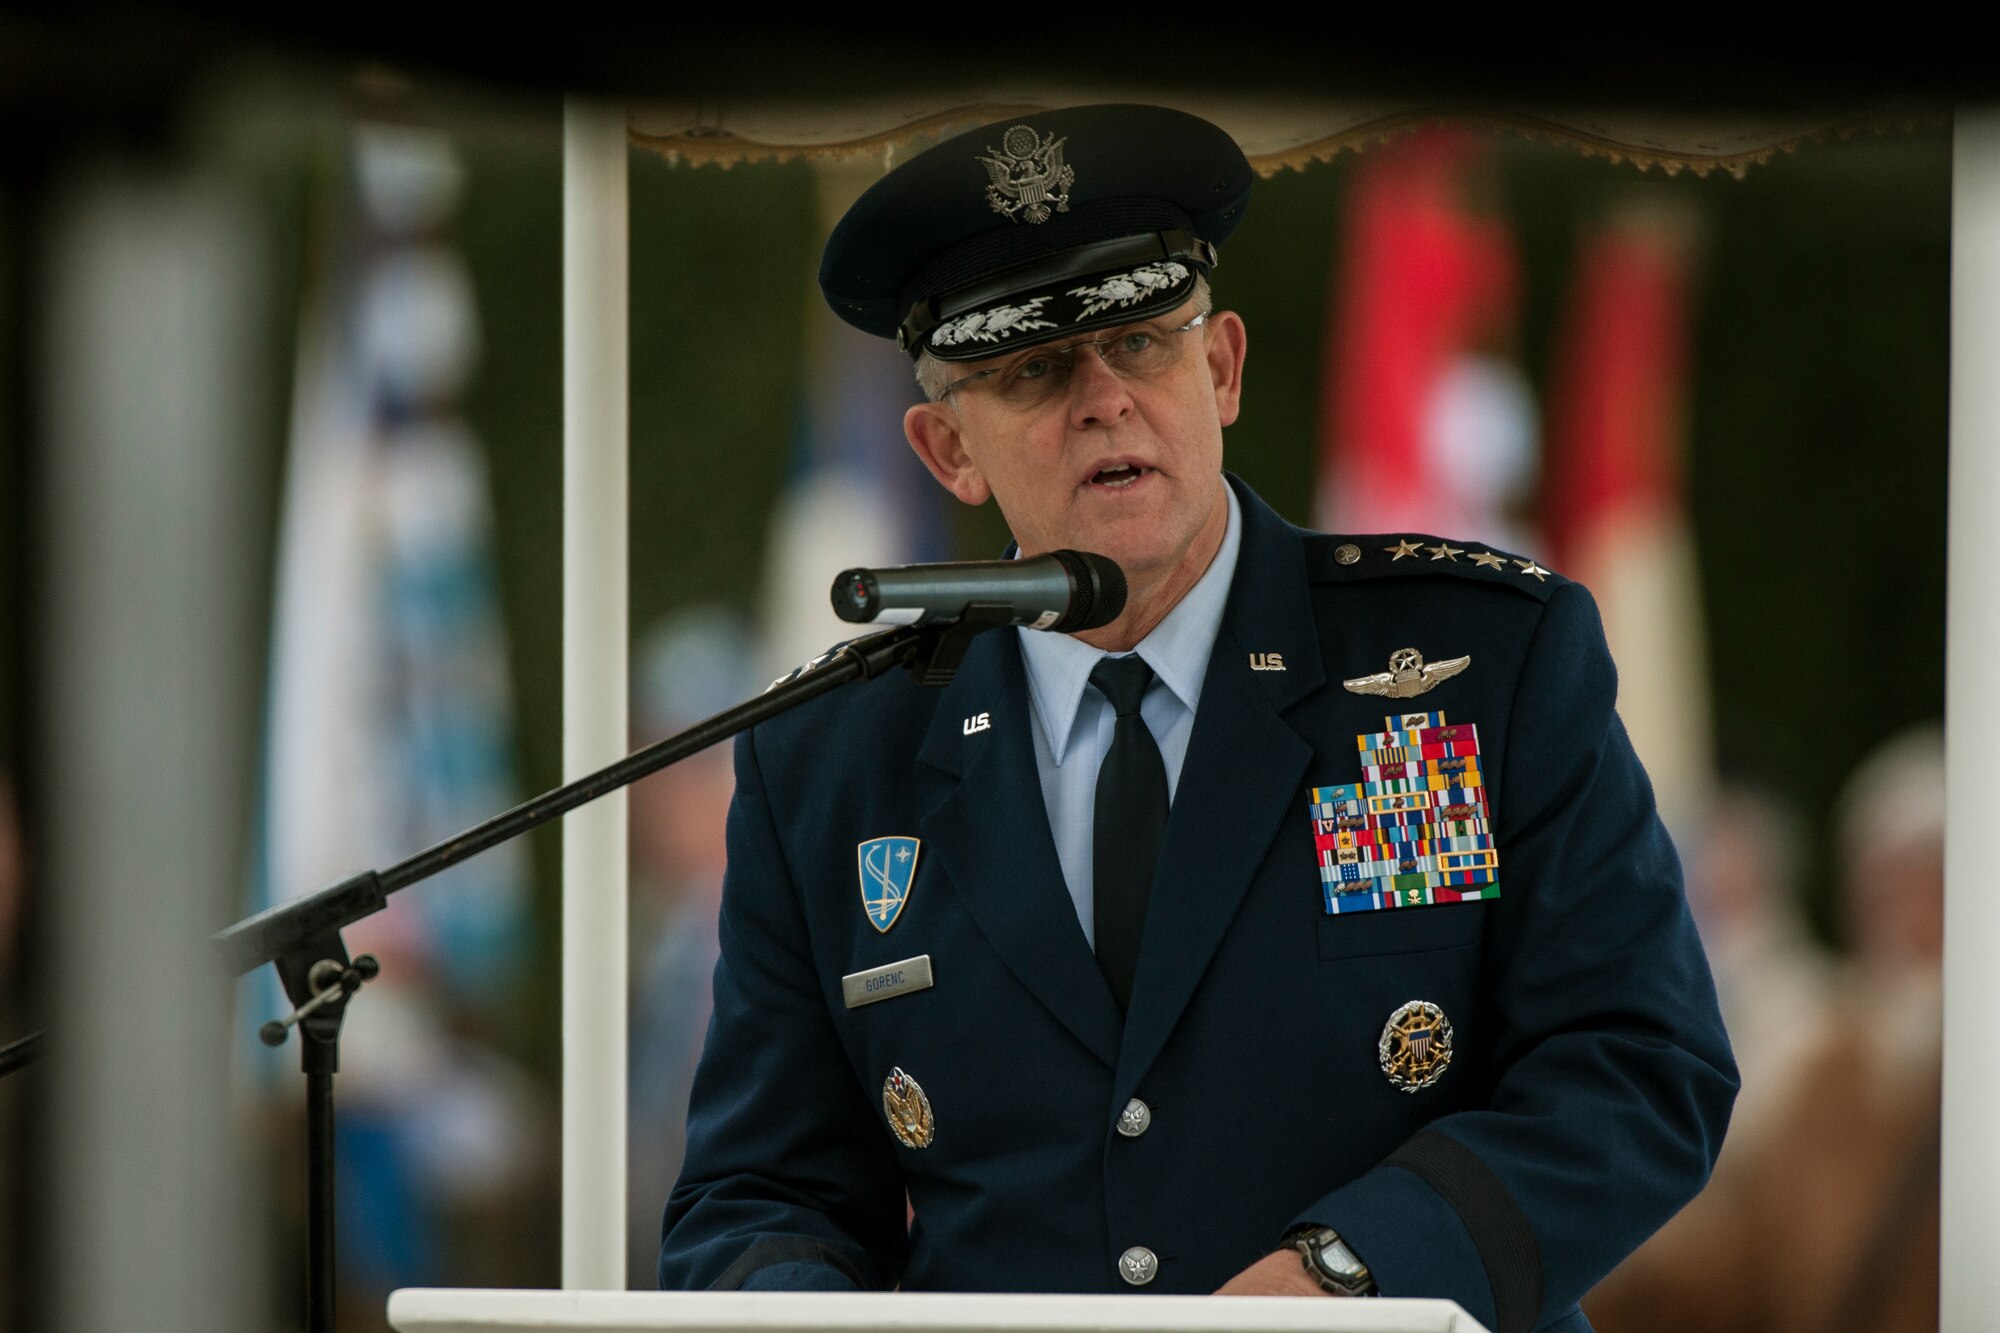 U.S. Air Force Gen. Frank Gorenc, U.S. Air Forces in Europe and Air Forces Africa commander, speaks during a ceremony at Luxembourg American Cemetery and Memorial Dec. 16, 2014, in Luxembourg. The ceremony honored all veterans who fought during the Battle of the Bulge, which began Dec. 16, 1944. (U.S. Air Force photo by Senior Airman Rusty Frank/Released)